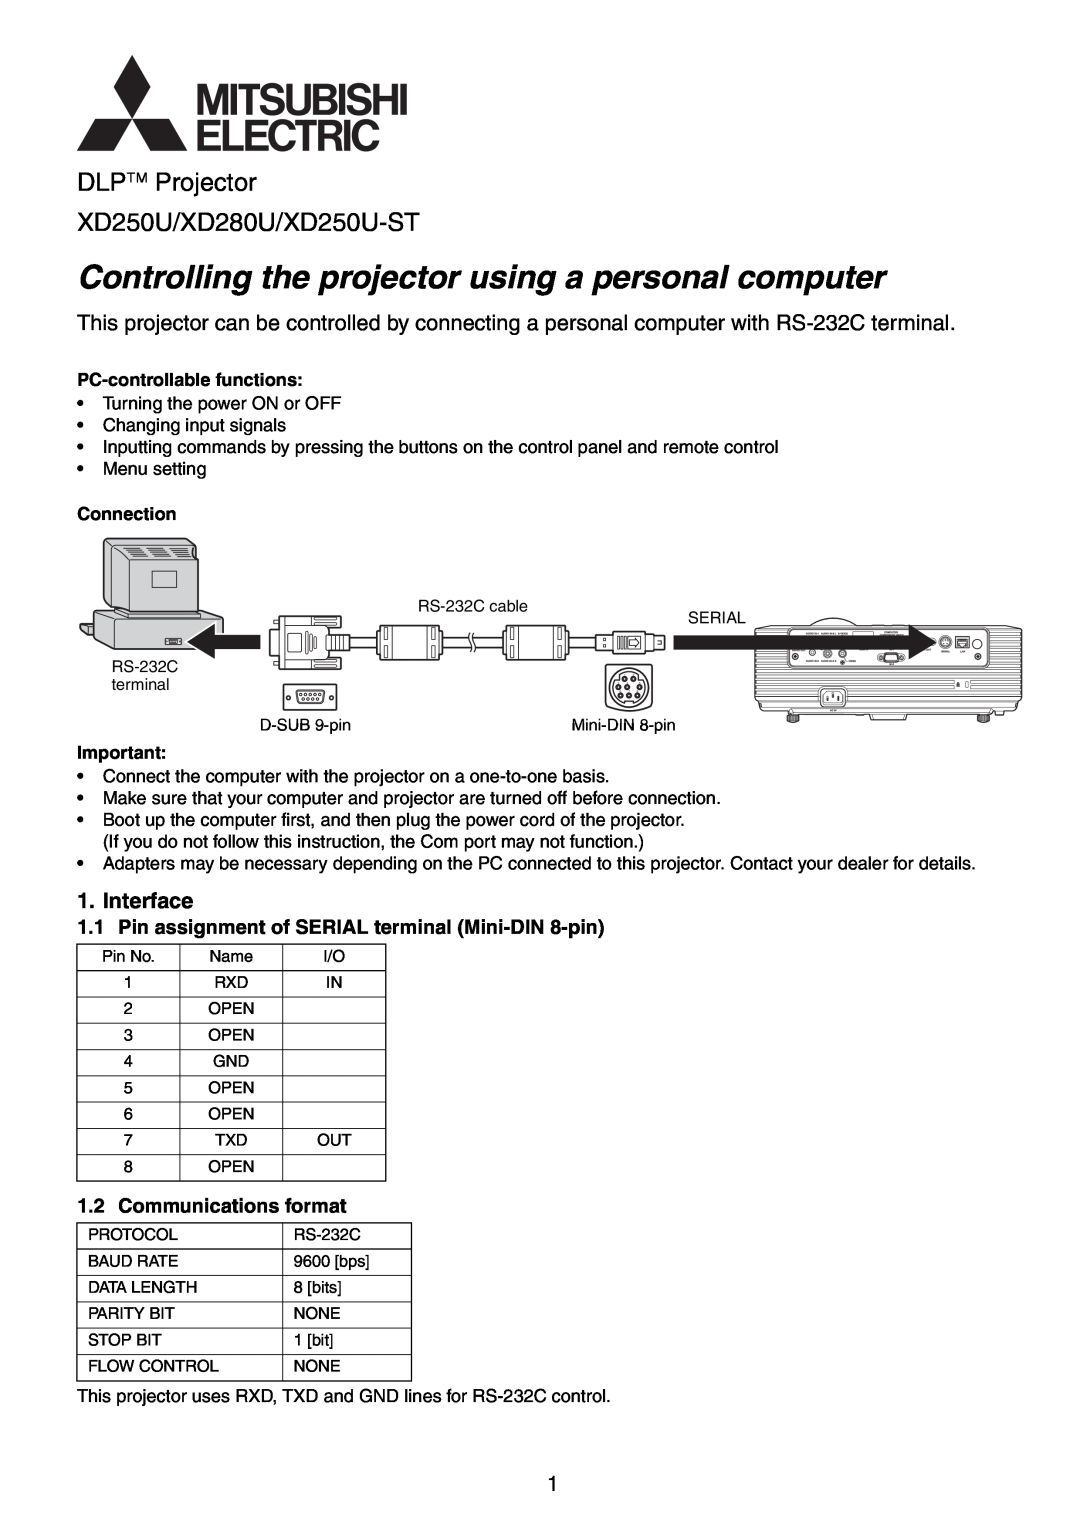 Mitsubishi Electronics XD250U-ST user manual Model, This User Manual is important to you, English, Data Projector 